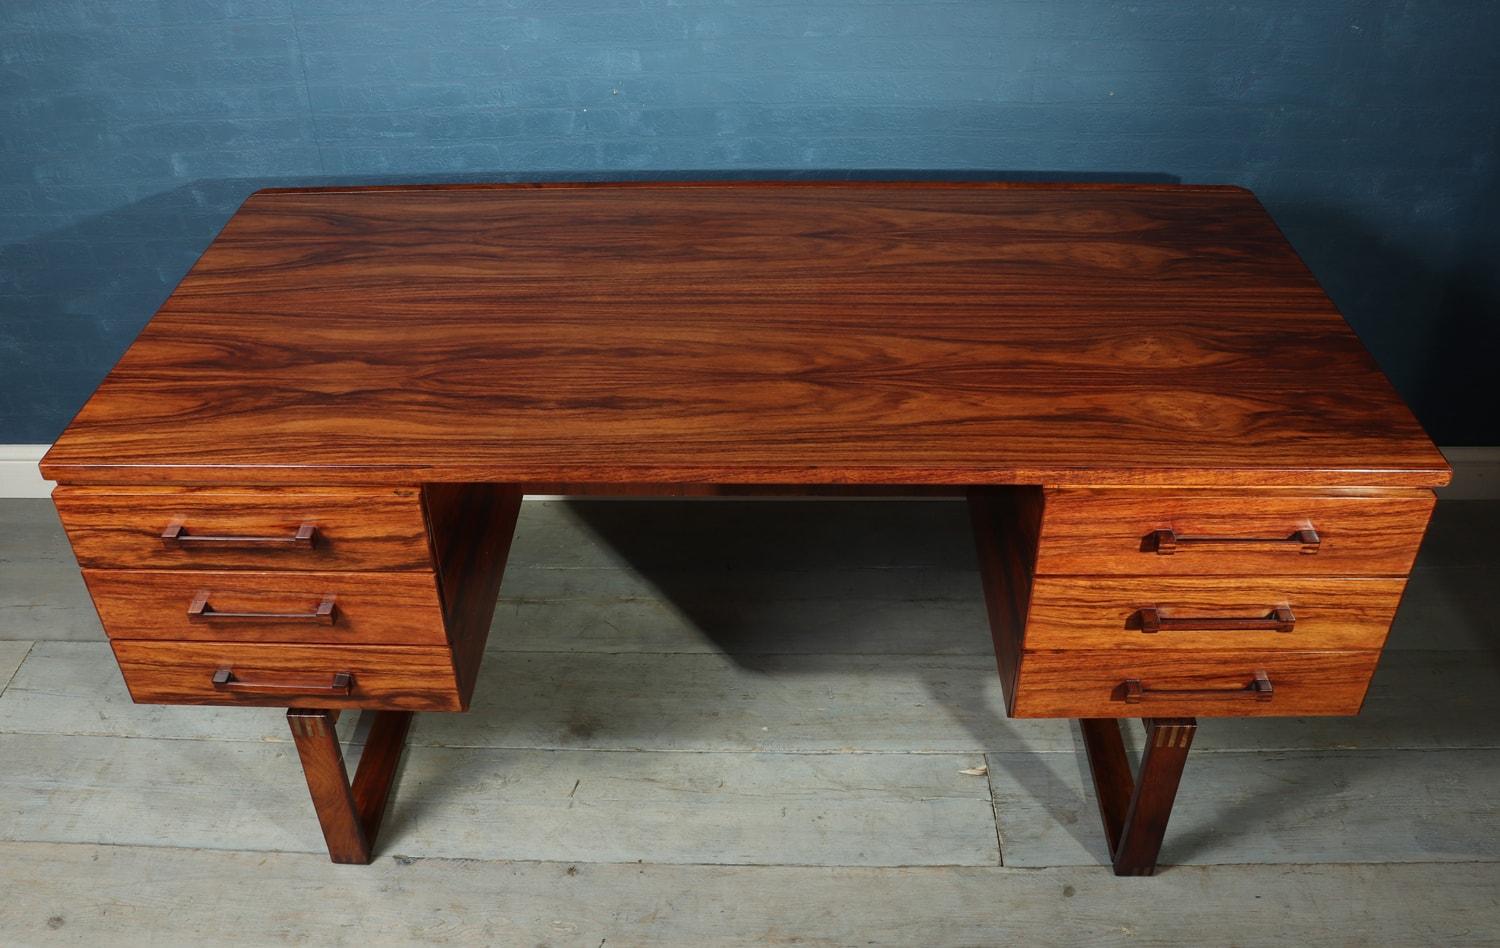 Midcentury desk by Henning Jensen
Designed by Henning Jensen and Torbin Valeur in Denmark in the mid-1960s. This rosewood desk has beautiful graining and the exposed finger joint construction. Highlighted by a subtle raised lip along the back edge,